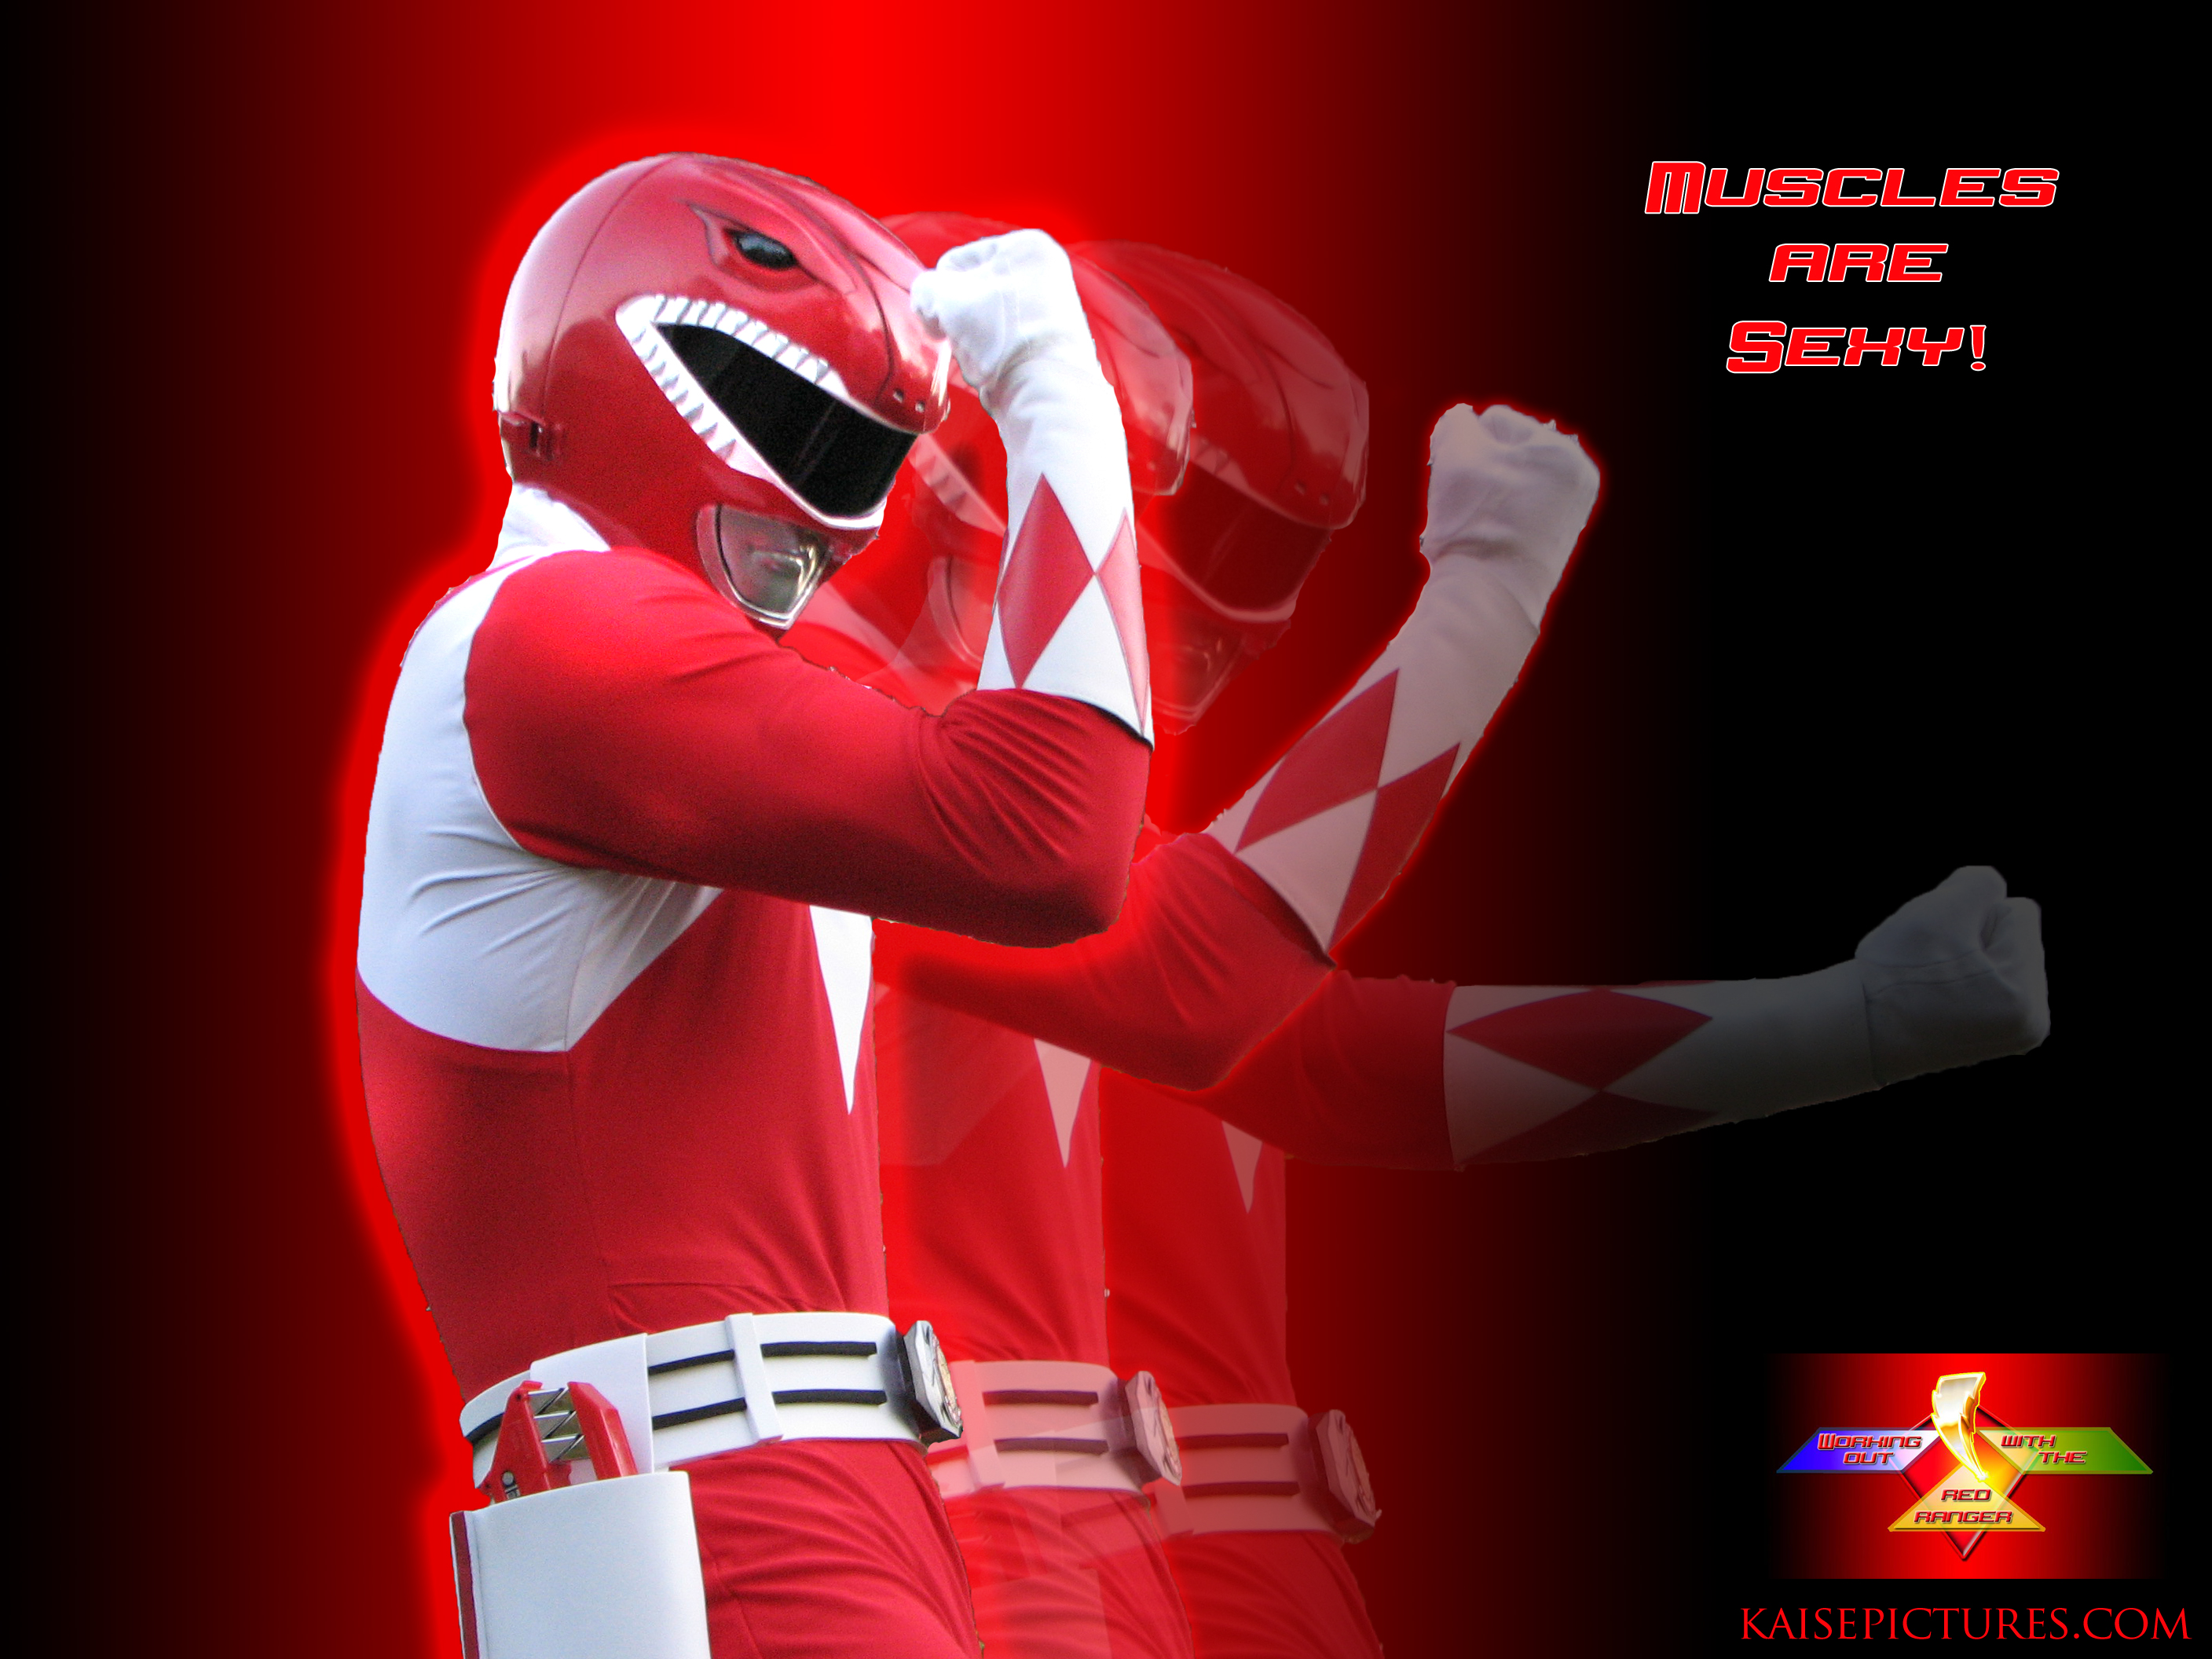 Red Ranger Workout Program Wallpaper Downloads - Kaise Pictures